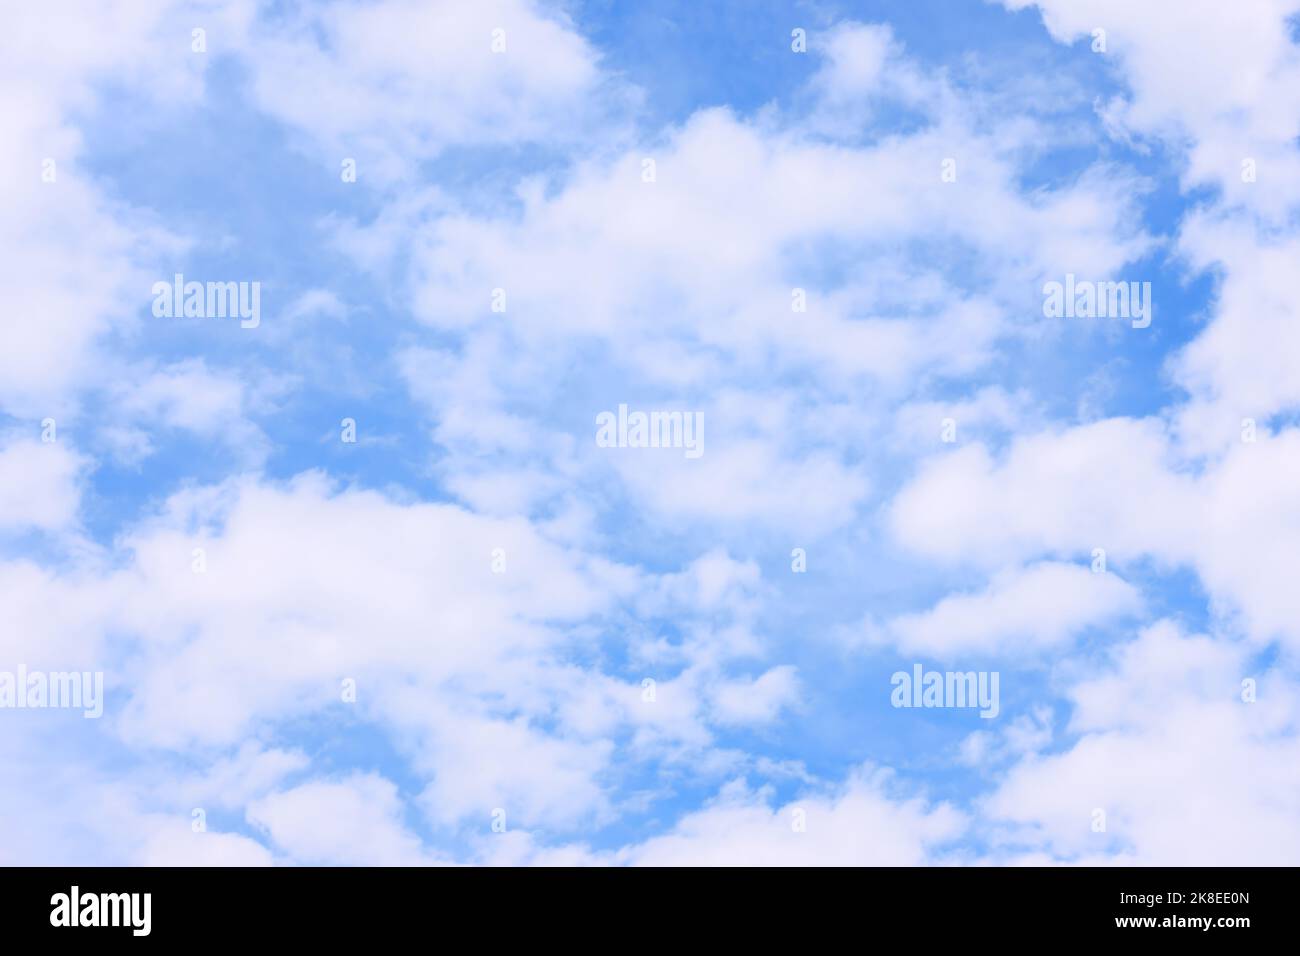 Clouds in the sky close up - Light blue abstract background Stock Photo